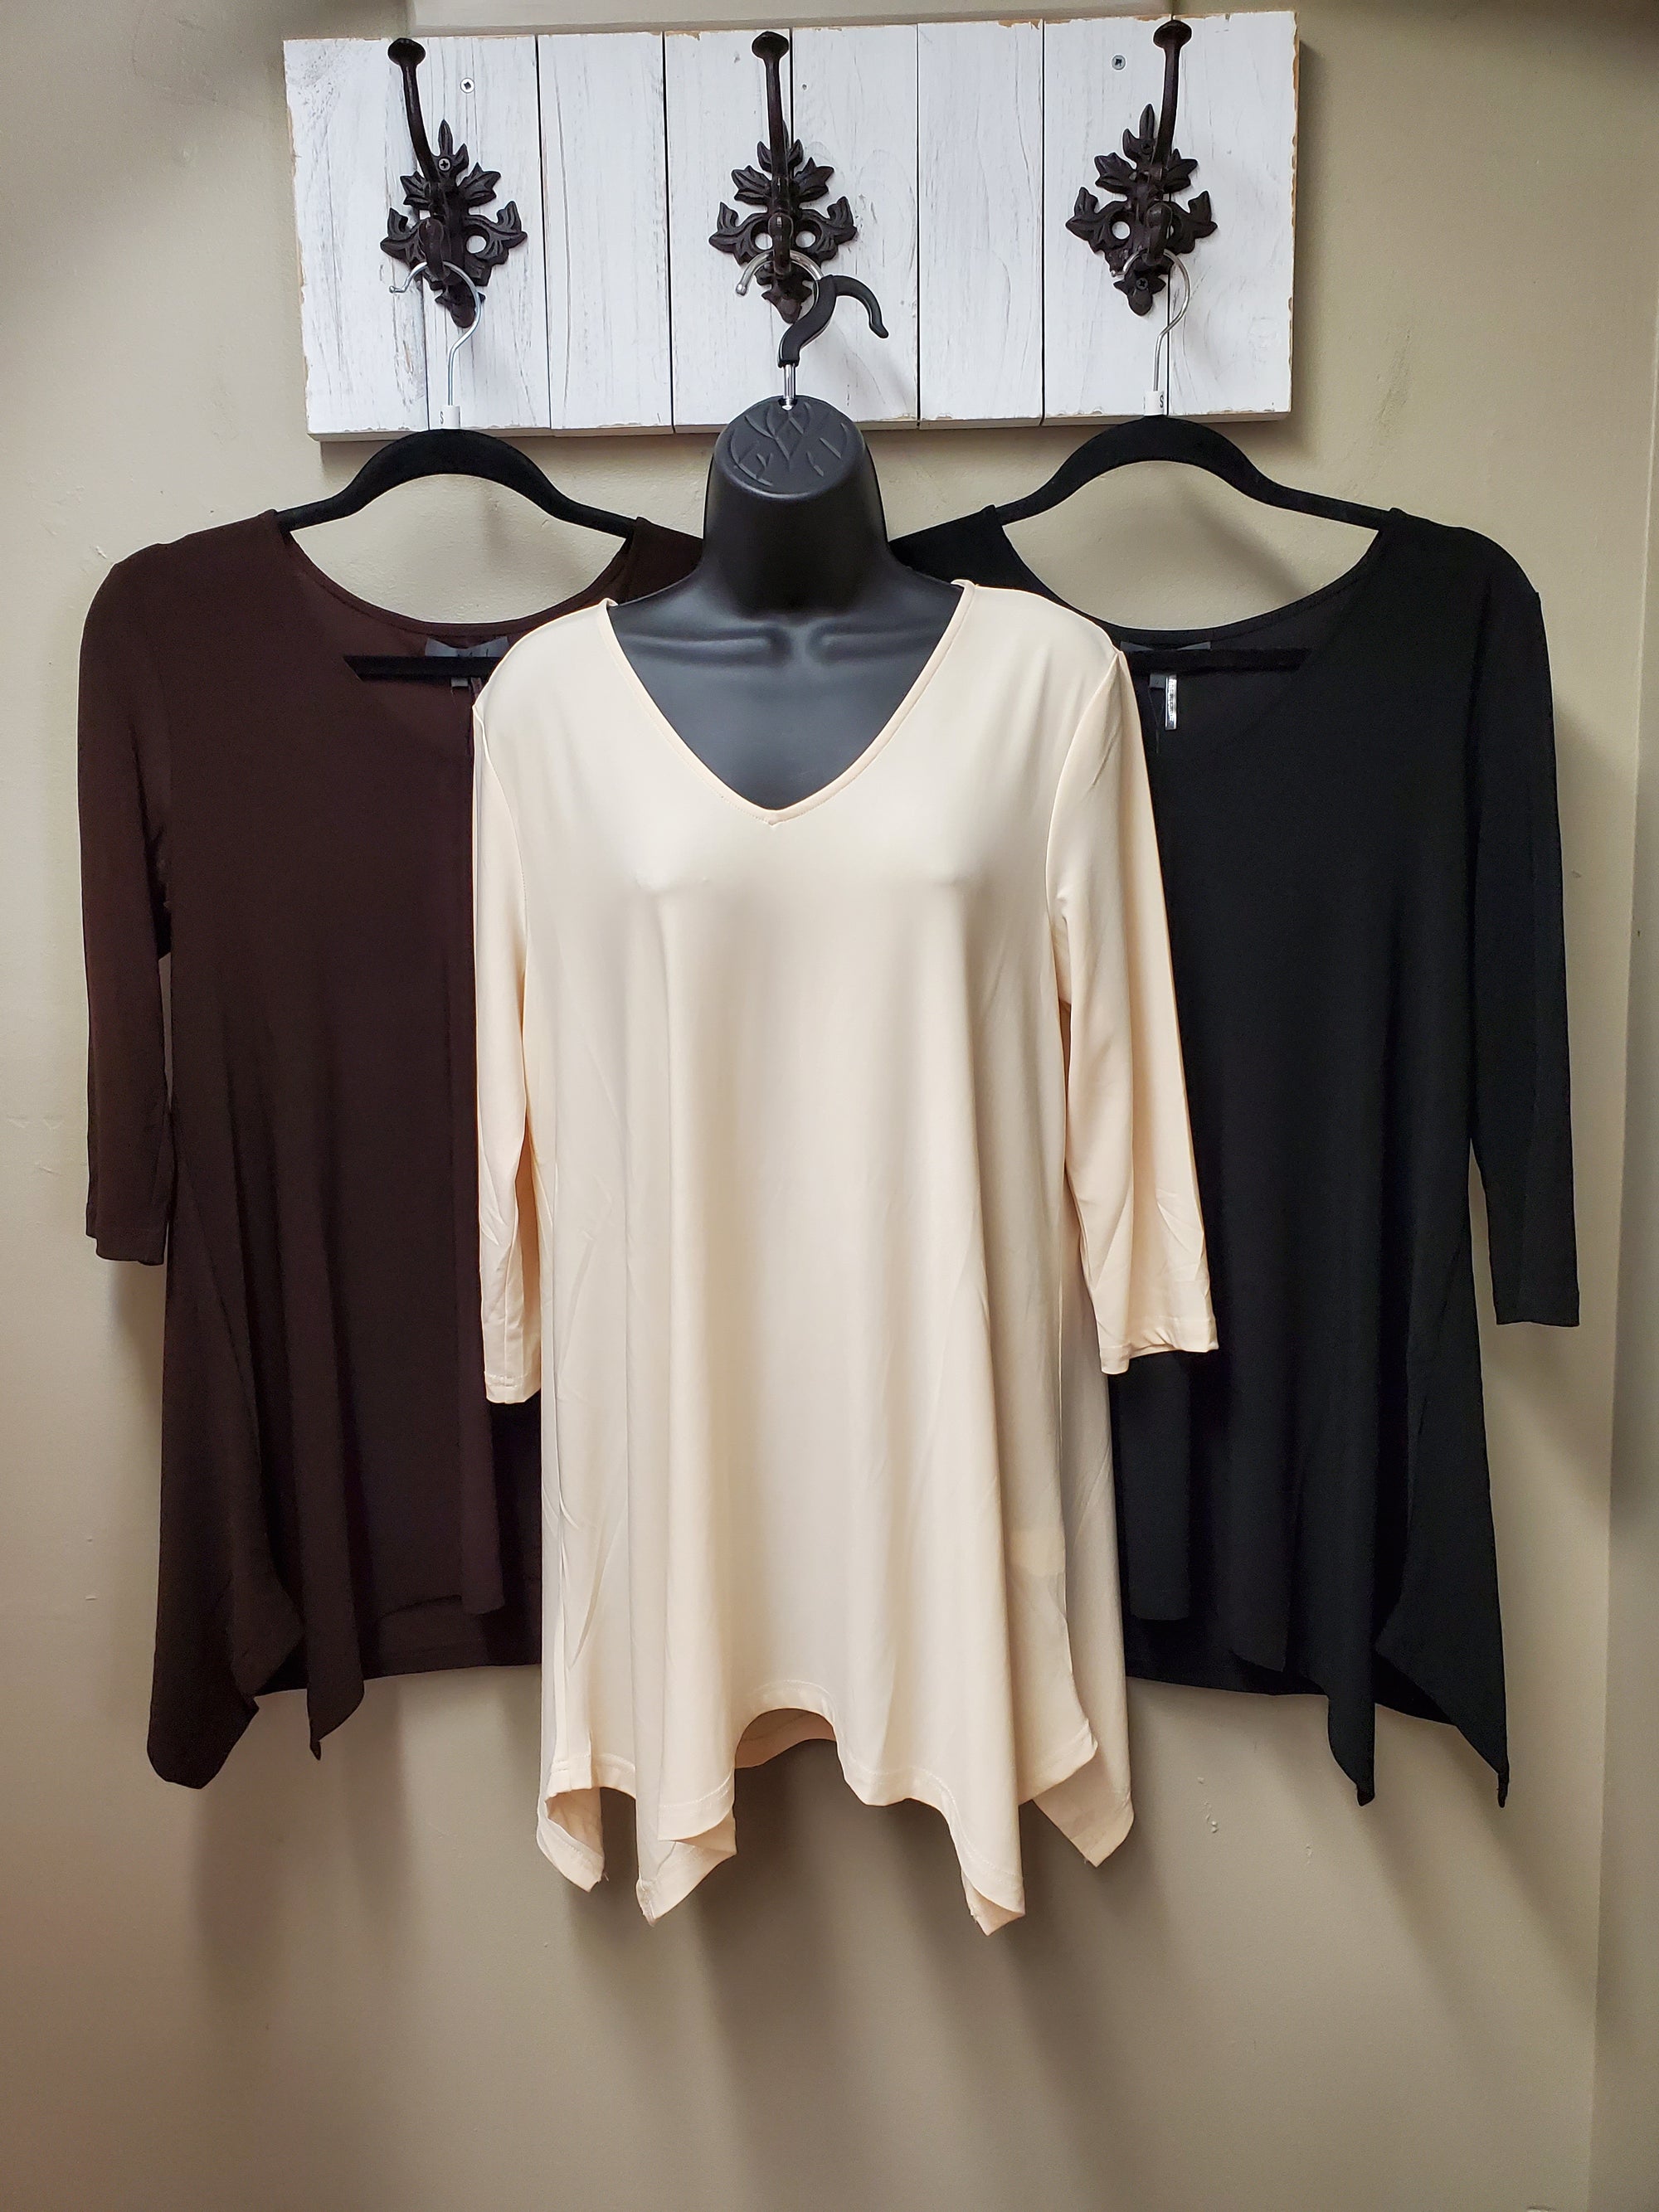 BEST SELLER NEUTRALS - Flattering Fit & Flair Tunic with 3/4 Sleeve - You-nique Bou-tique